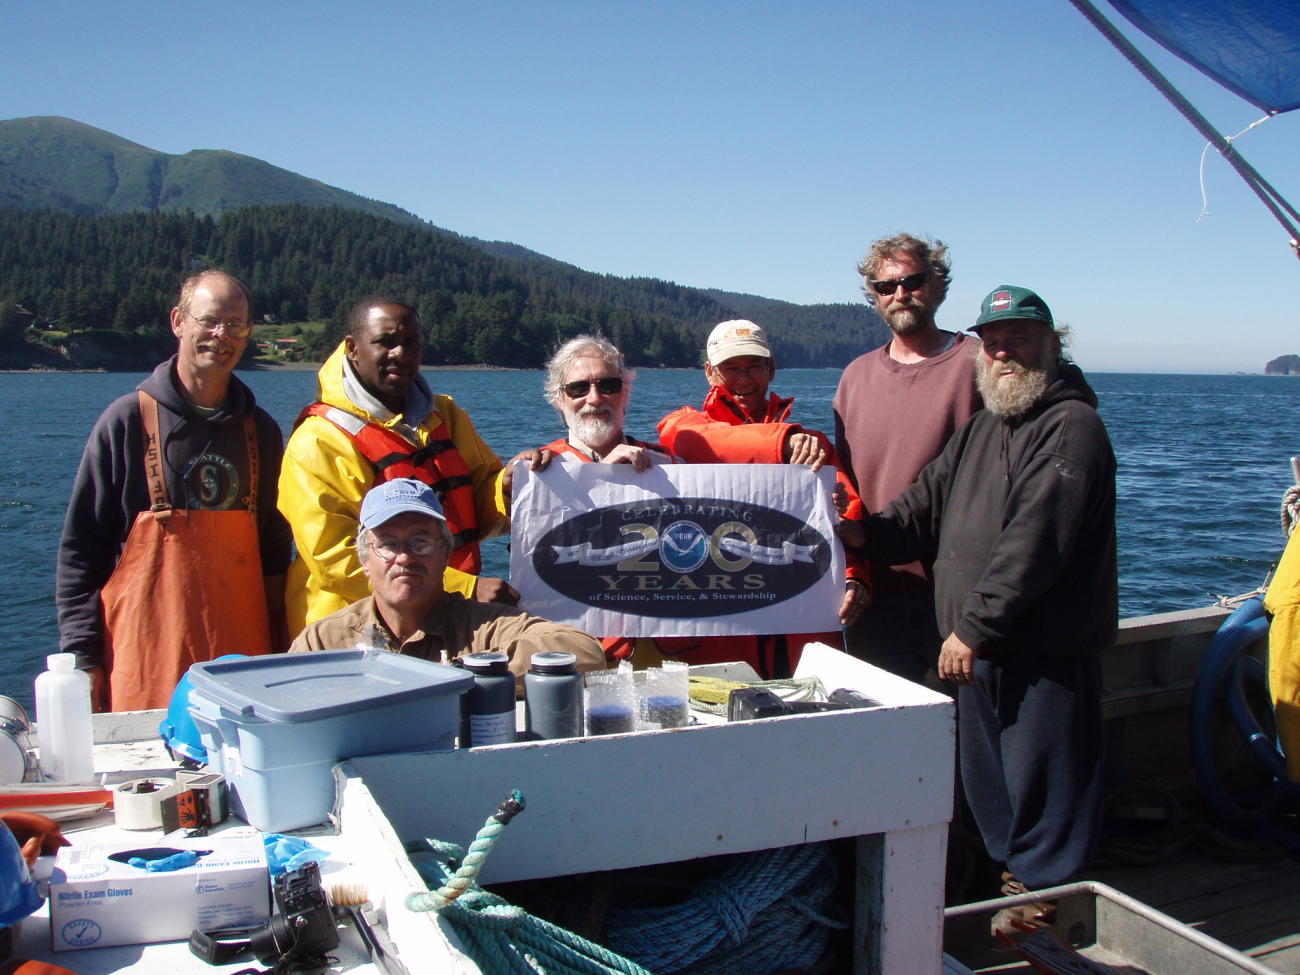 National Status & Trends Program scientists from NOAA's Center for CoastalMonitoring and Assessment pose with their collaborators aboard the fishingColumbia, including a representative of the Alaskan Native village ofPort Graham